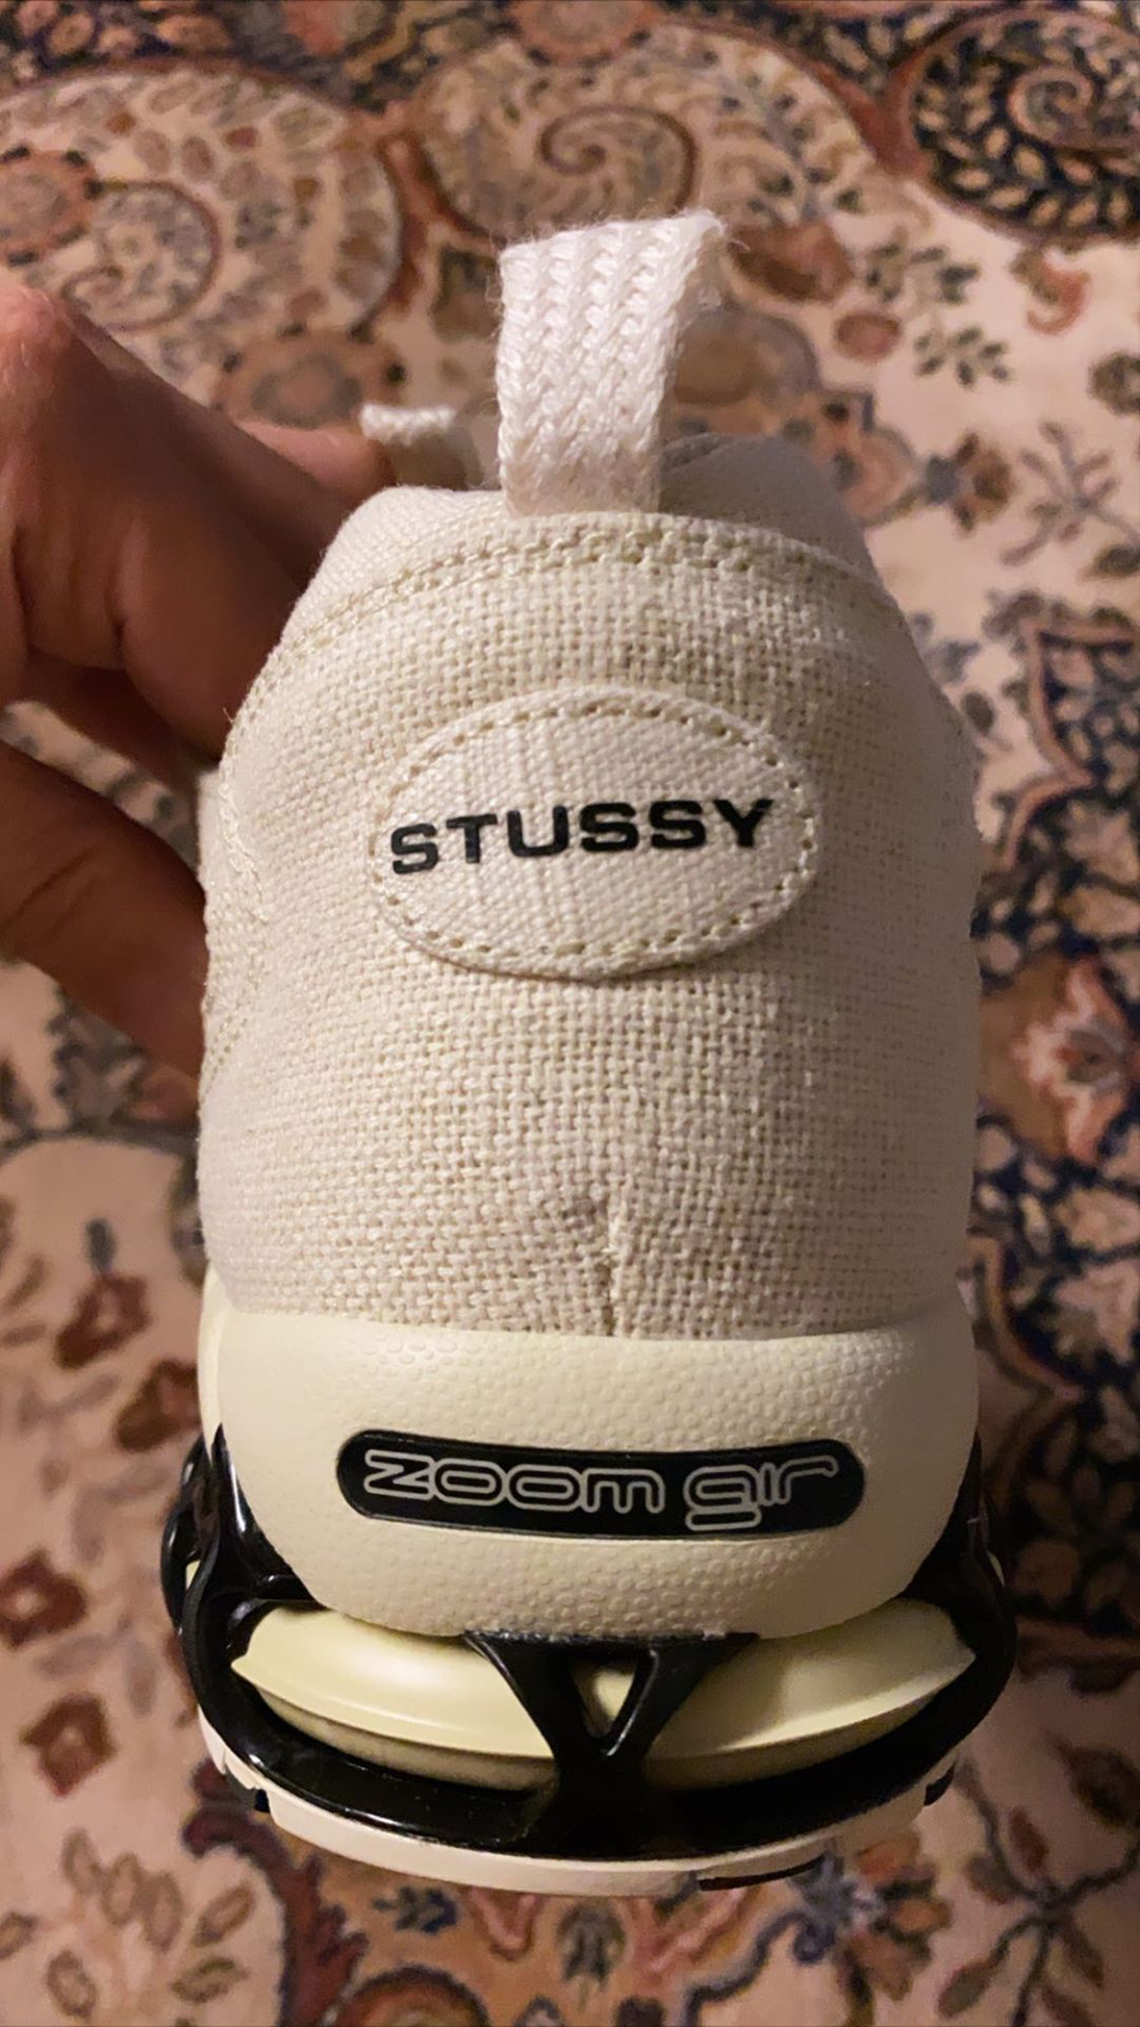 Stussy flyknit air force 1 colorways 2020 Release Info 3